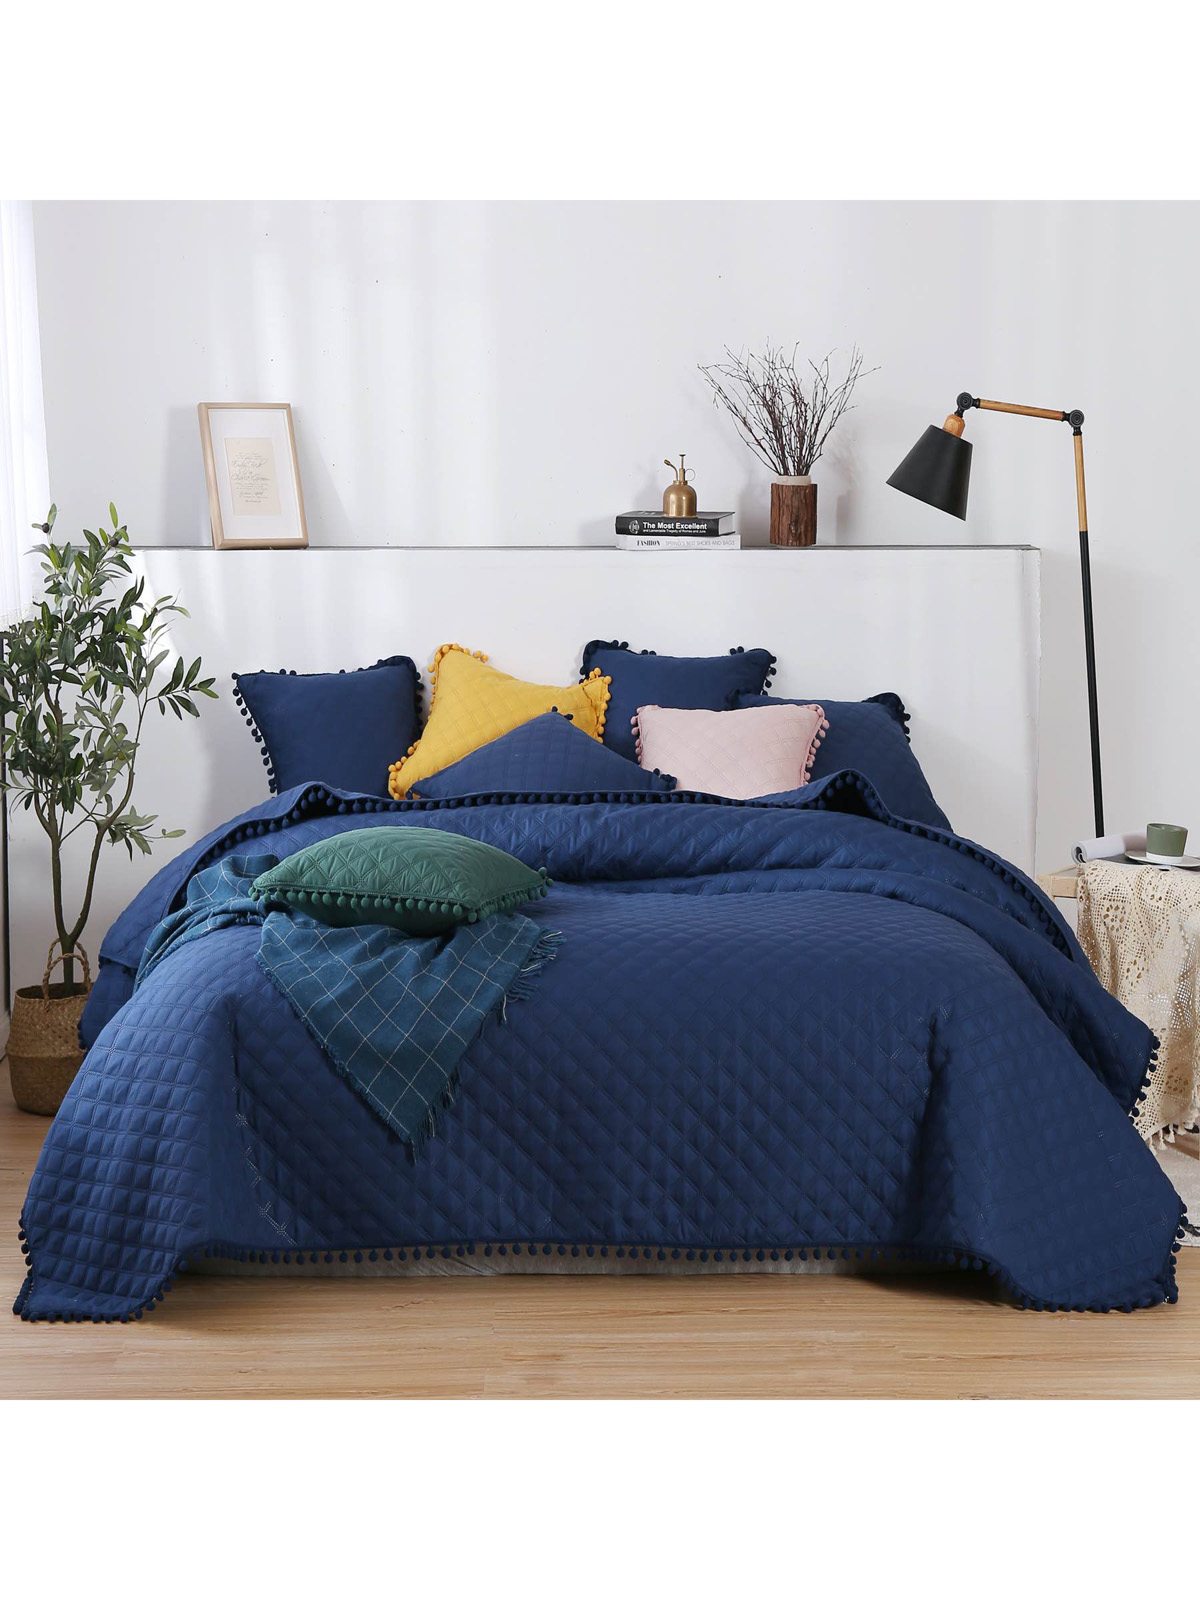 Edoti Quilted Bedspread Pompoo A735